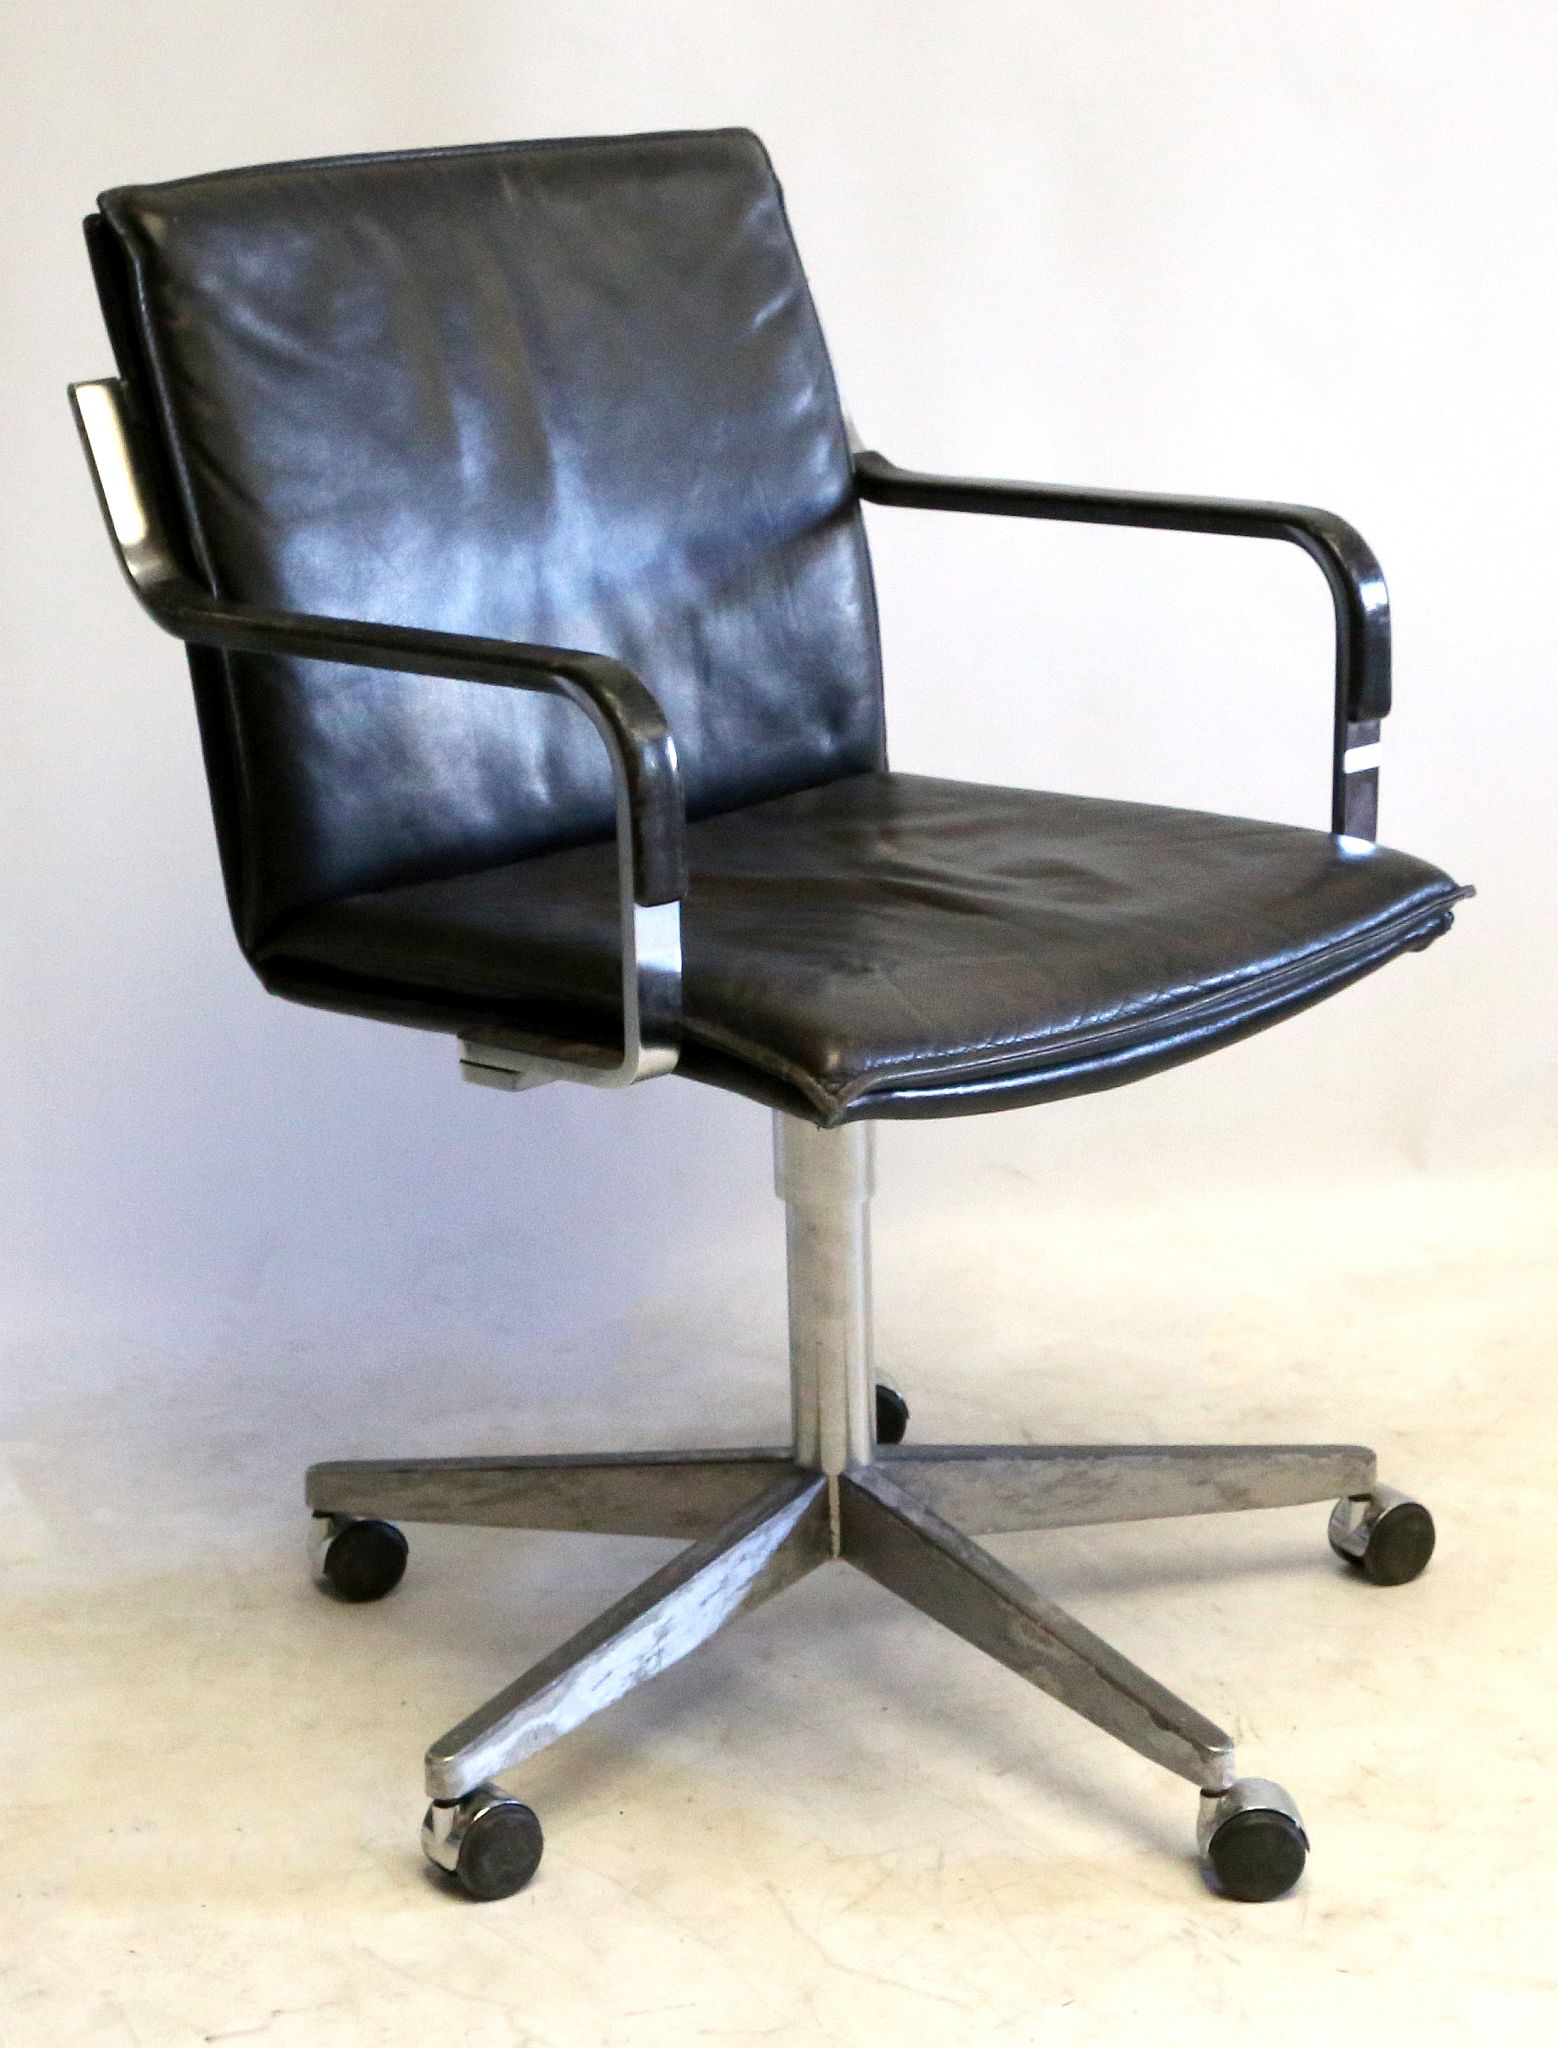 A 1970's BLACK LEATHER OFFICE CHAIR, manufactured